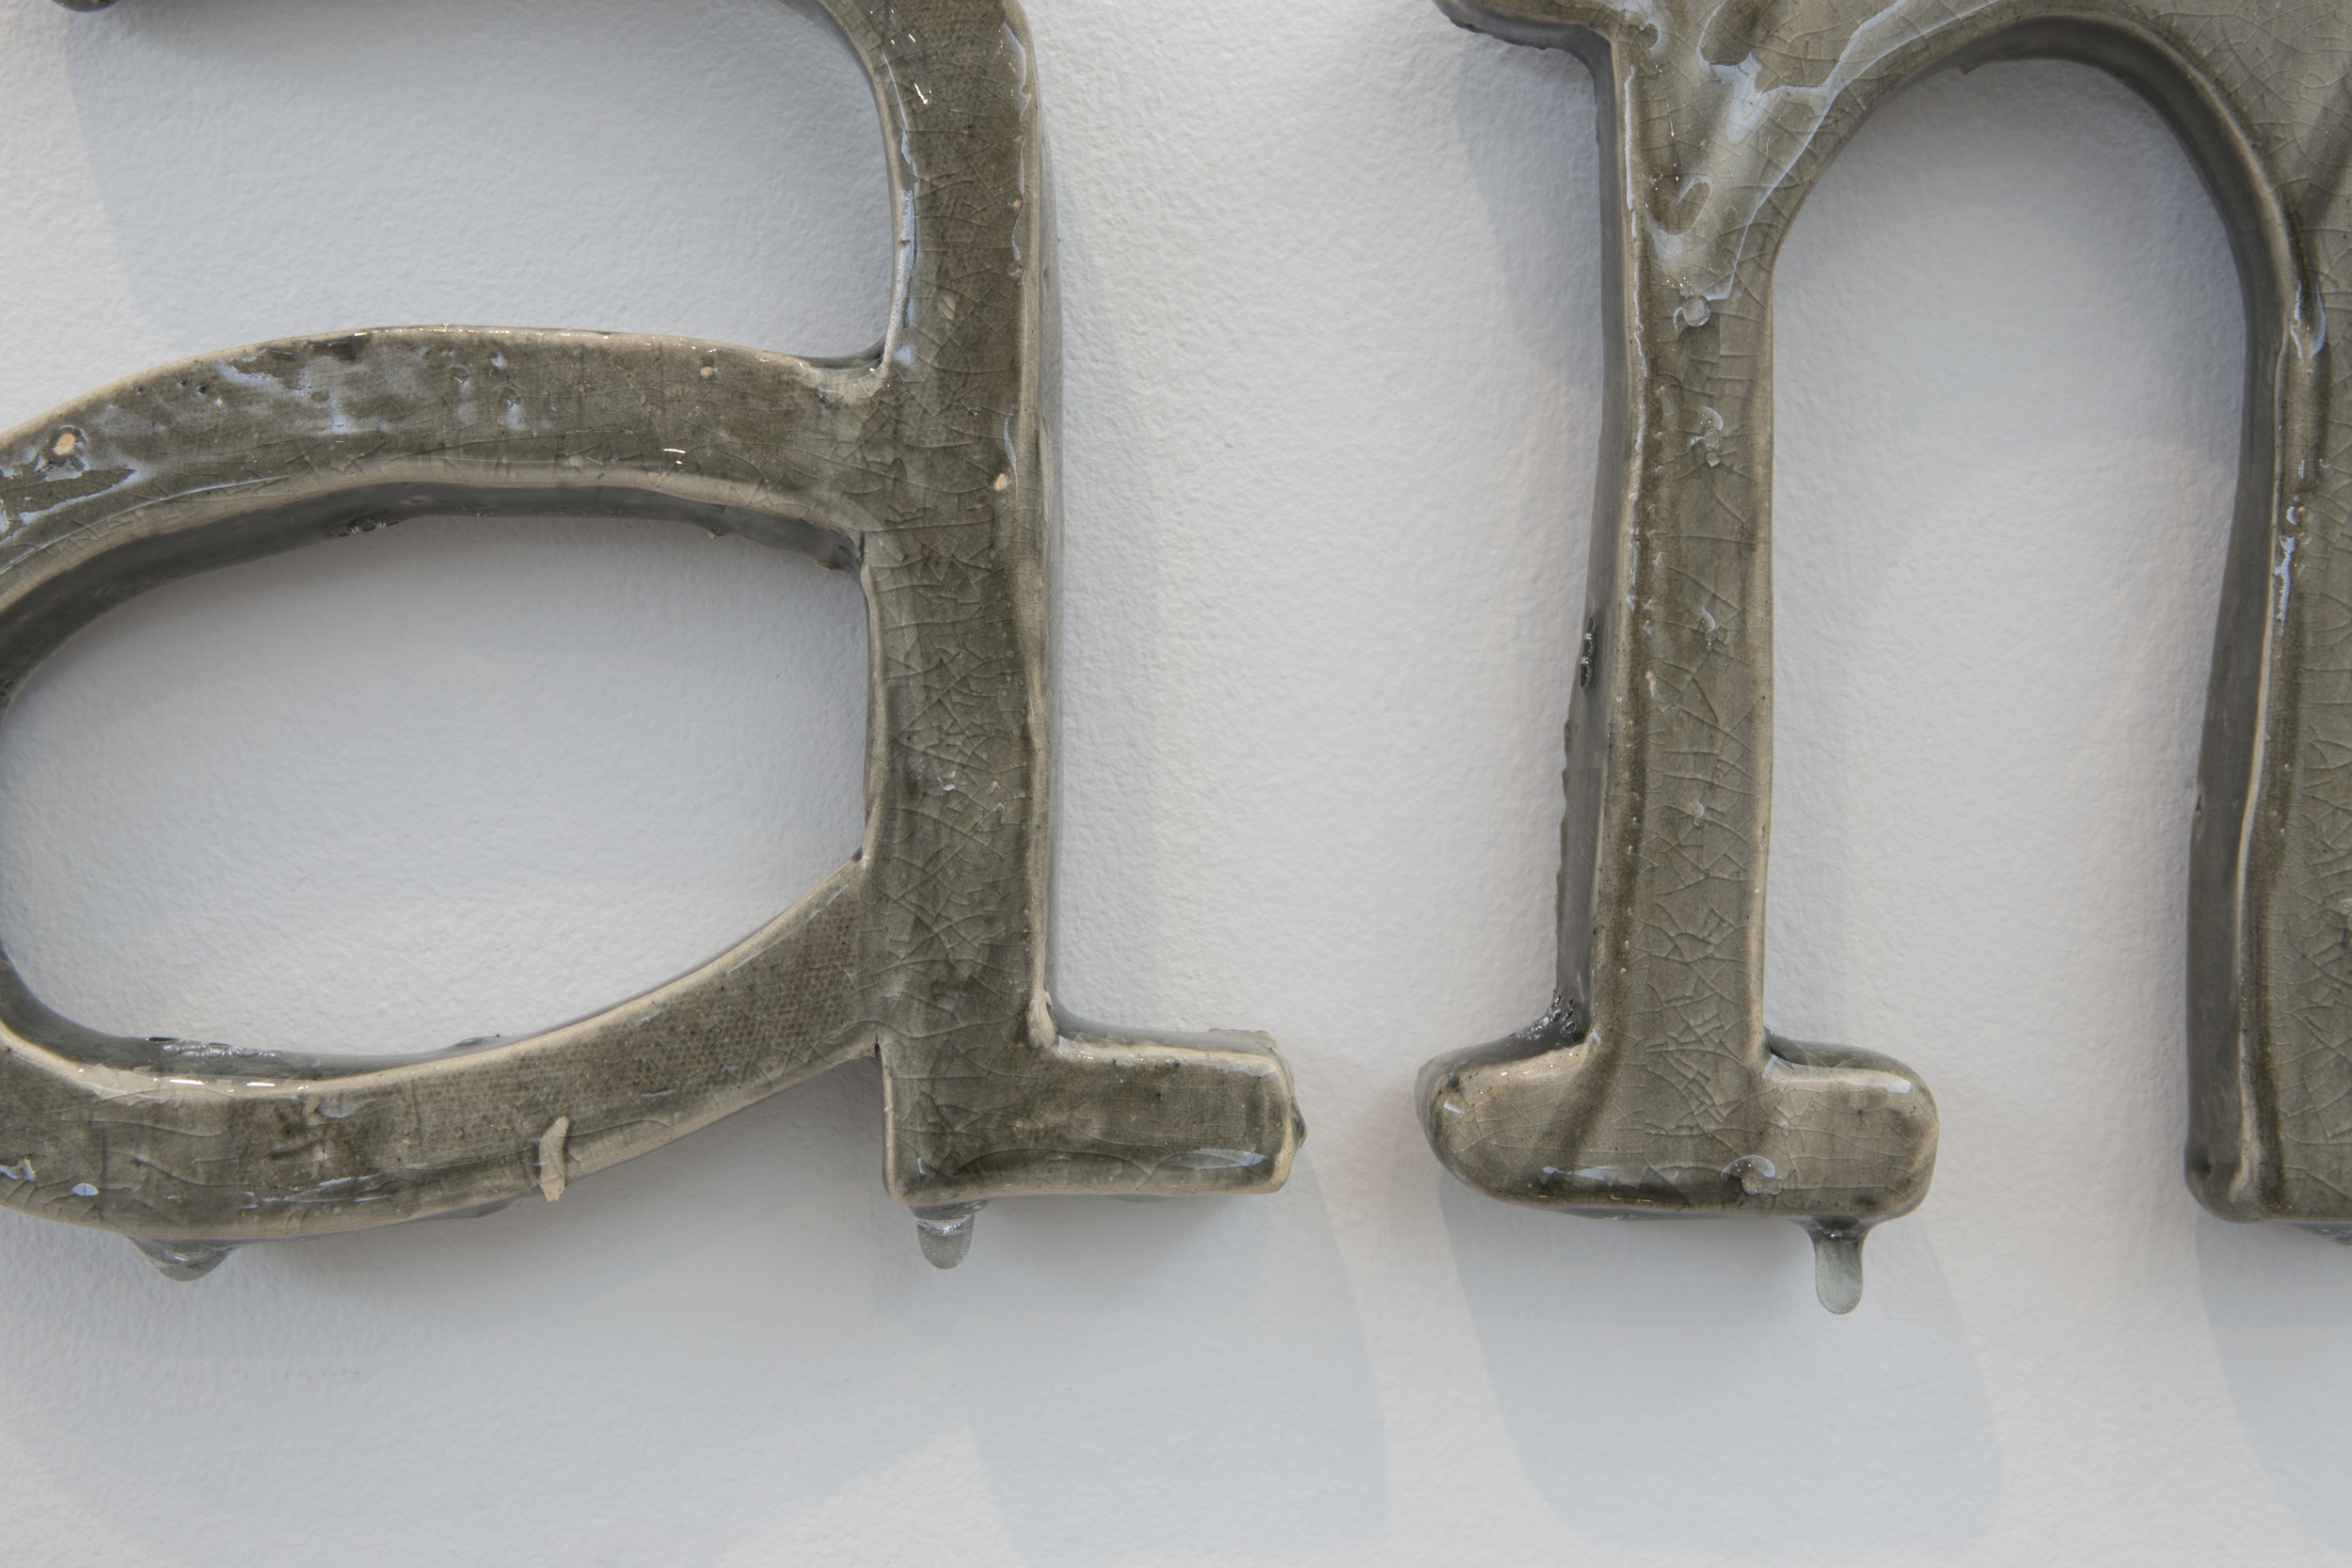   Alphabets and Earth: The Clay Letters , glazed earthenware, dimensions variable, 2015. 